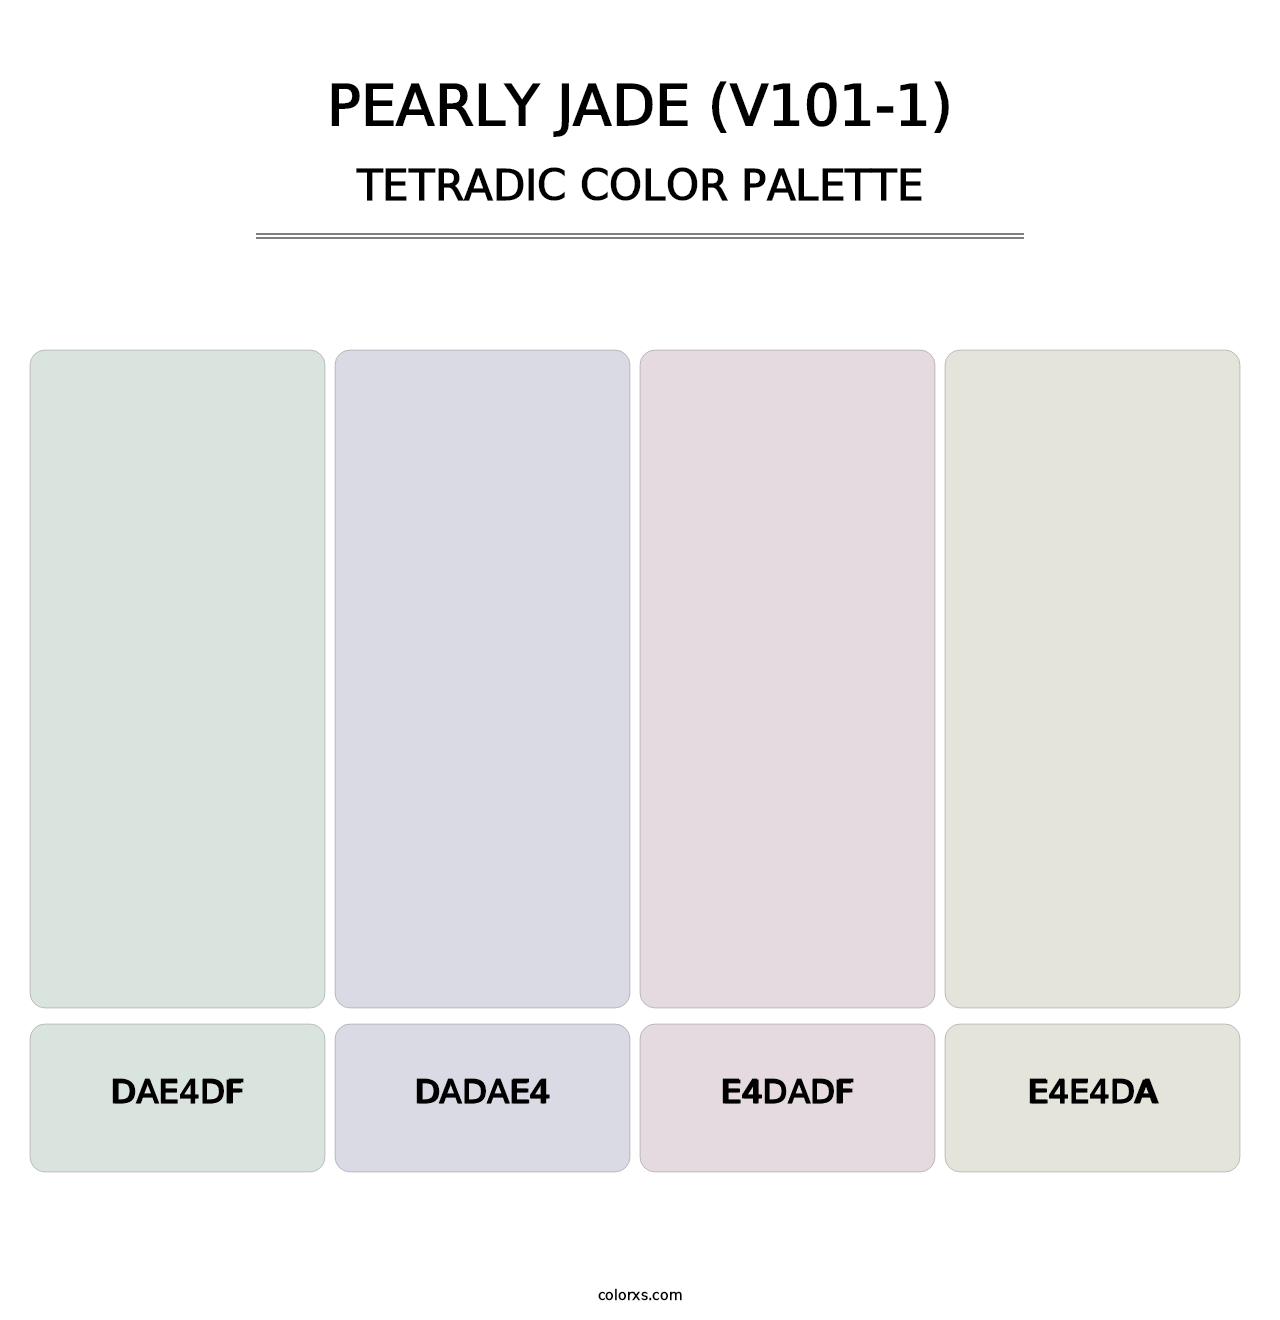 Pearly Jade (V101-1) - Tetradic Color Palette